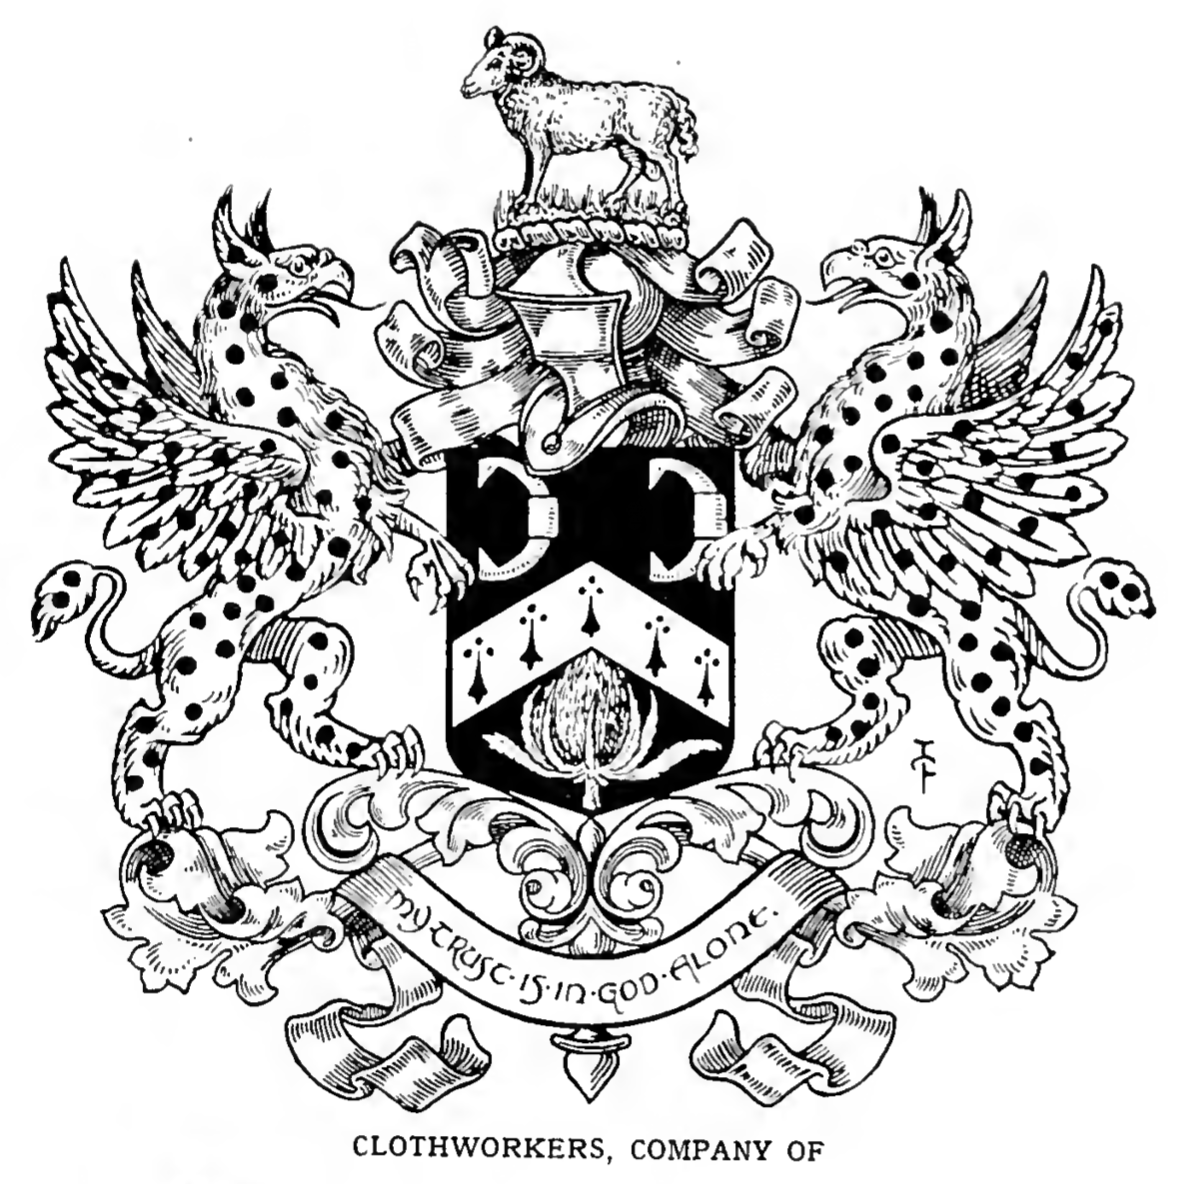 CLOTHWORKERS, Worshipful Company of (London).